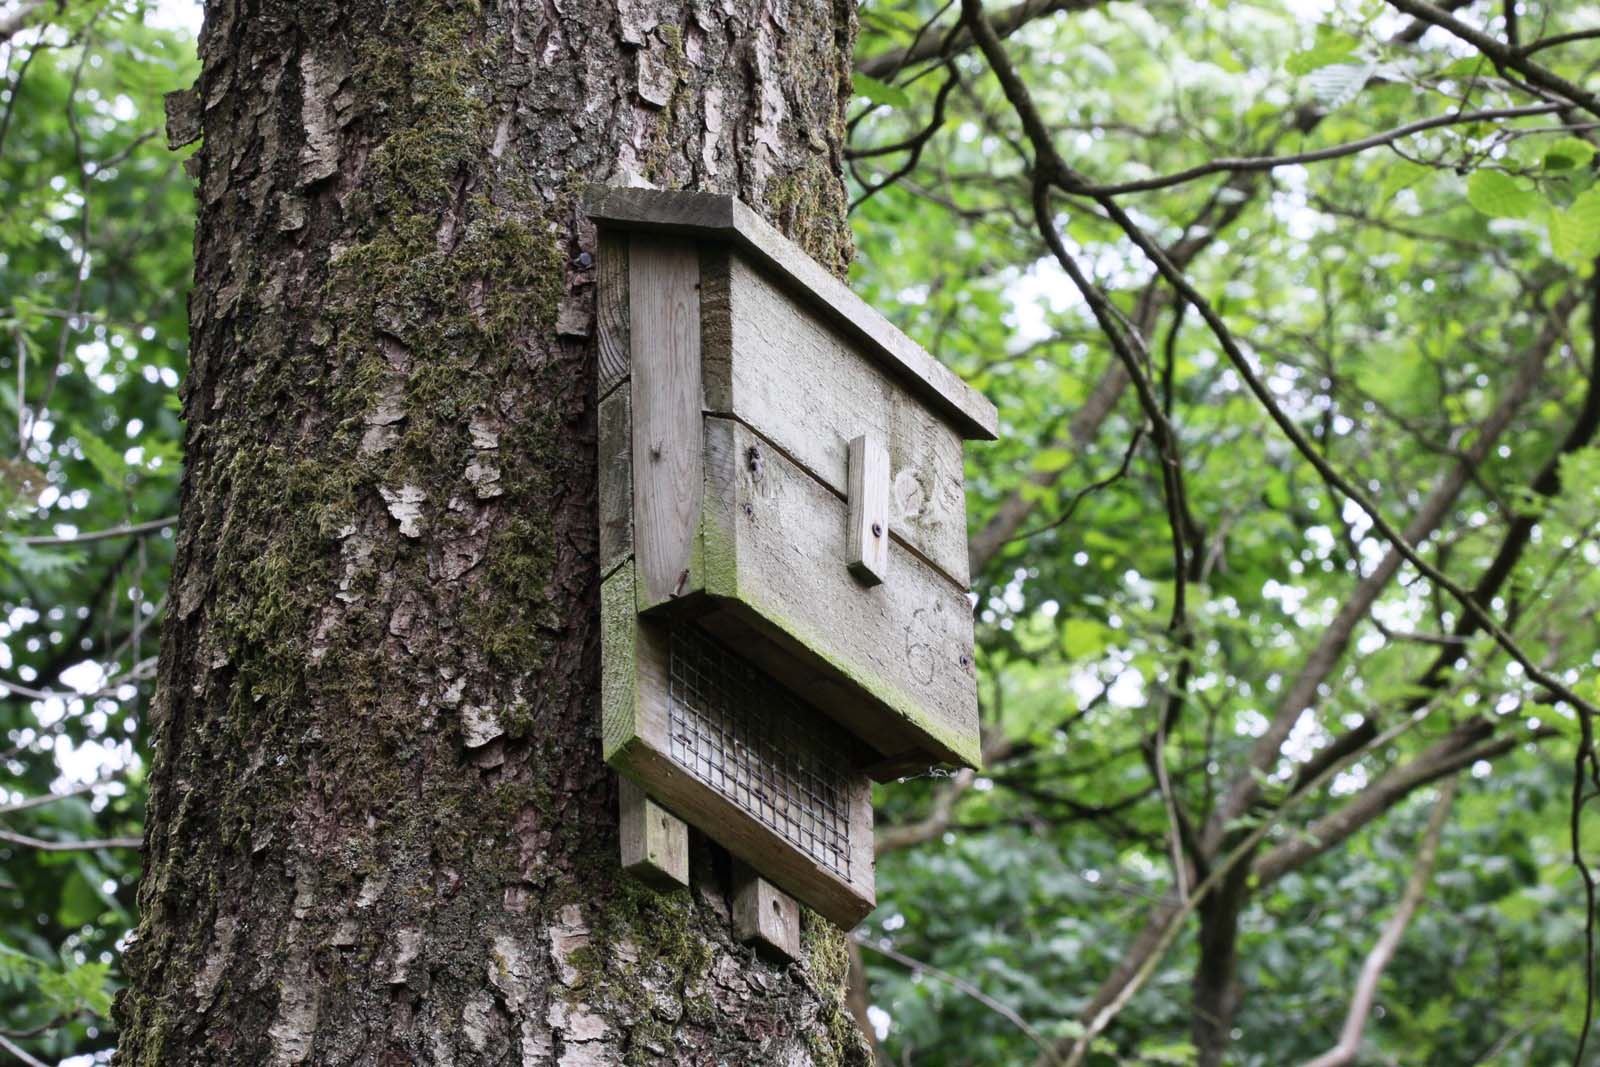 A wooden bat box mounted on the trunk of a tree